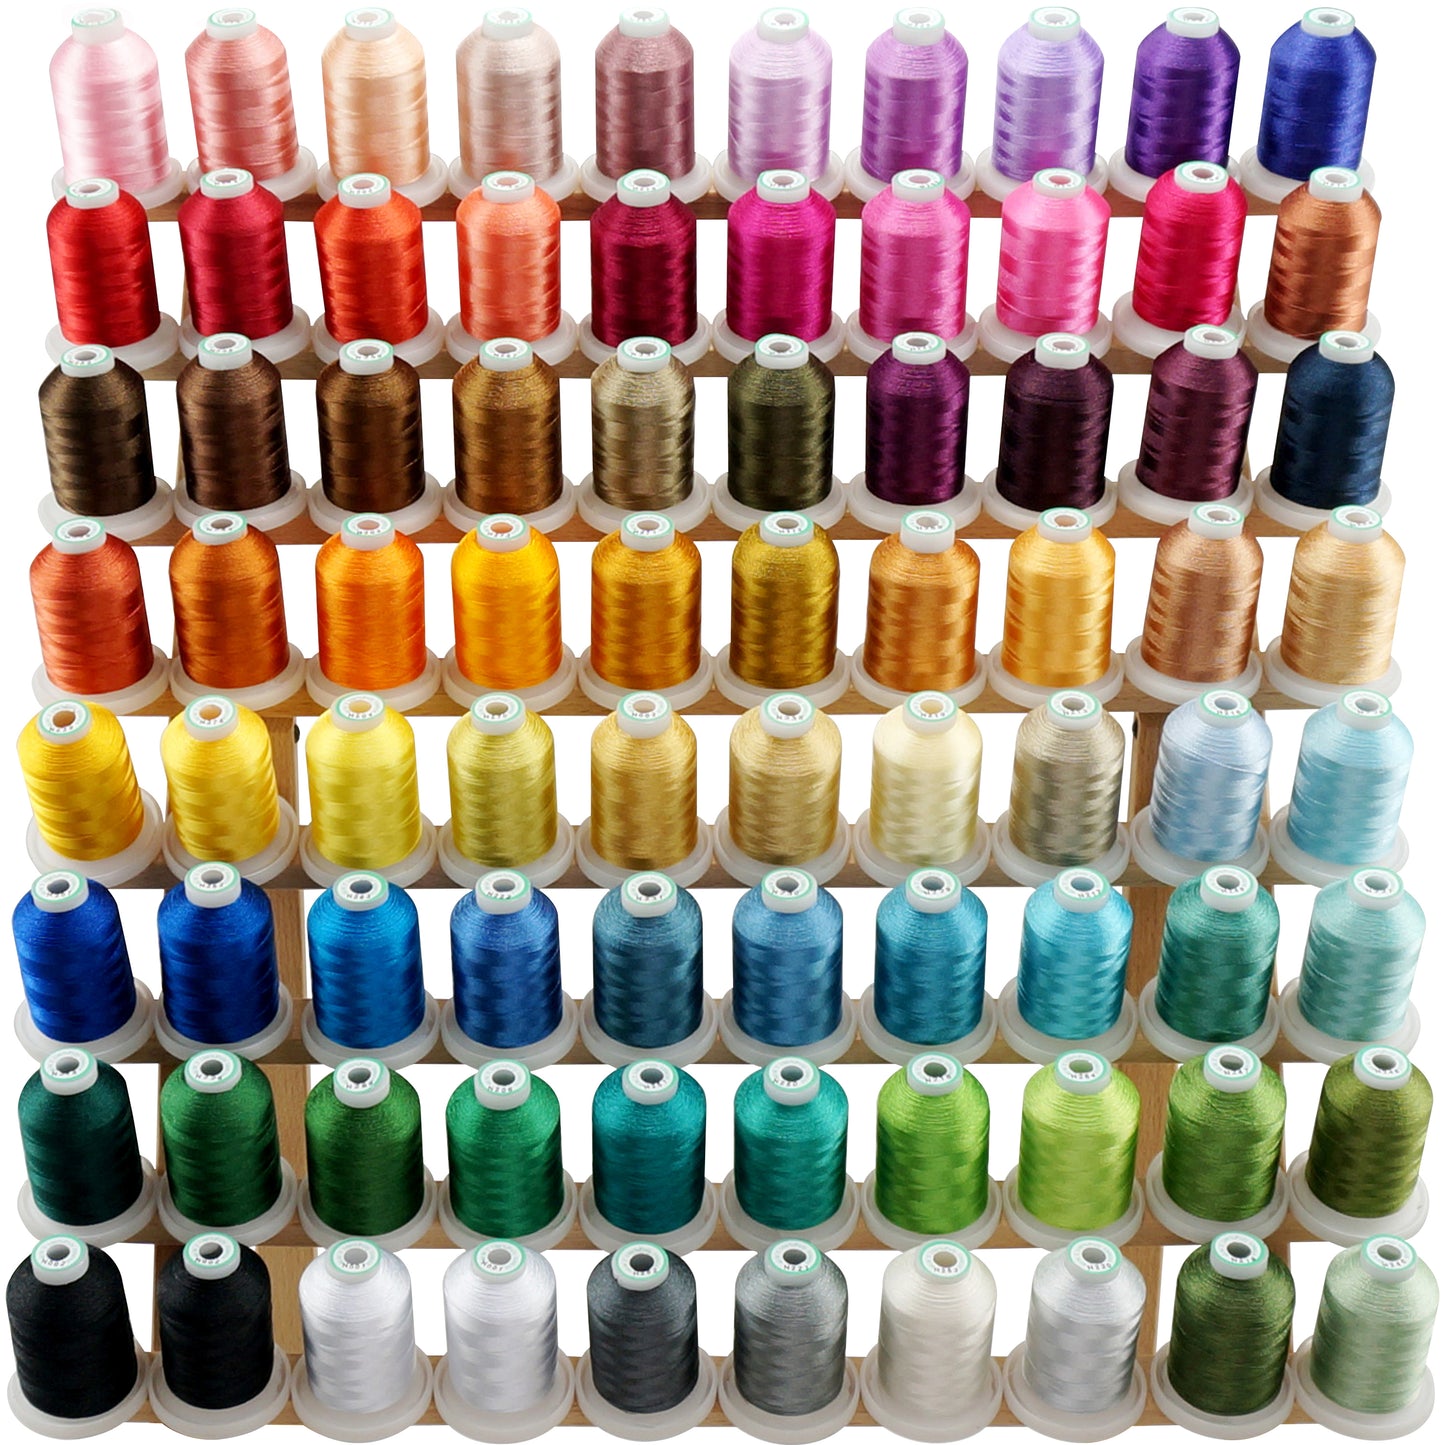 New brothread 32 Spools Polyester Embroidery Machine Thread Kit 1000M  (1100Y) Each Spool - Colors Compatible with Janome and Robison-Anton Colors